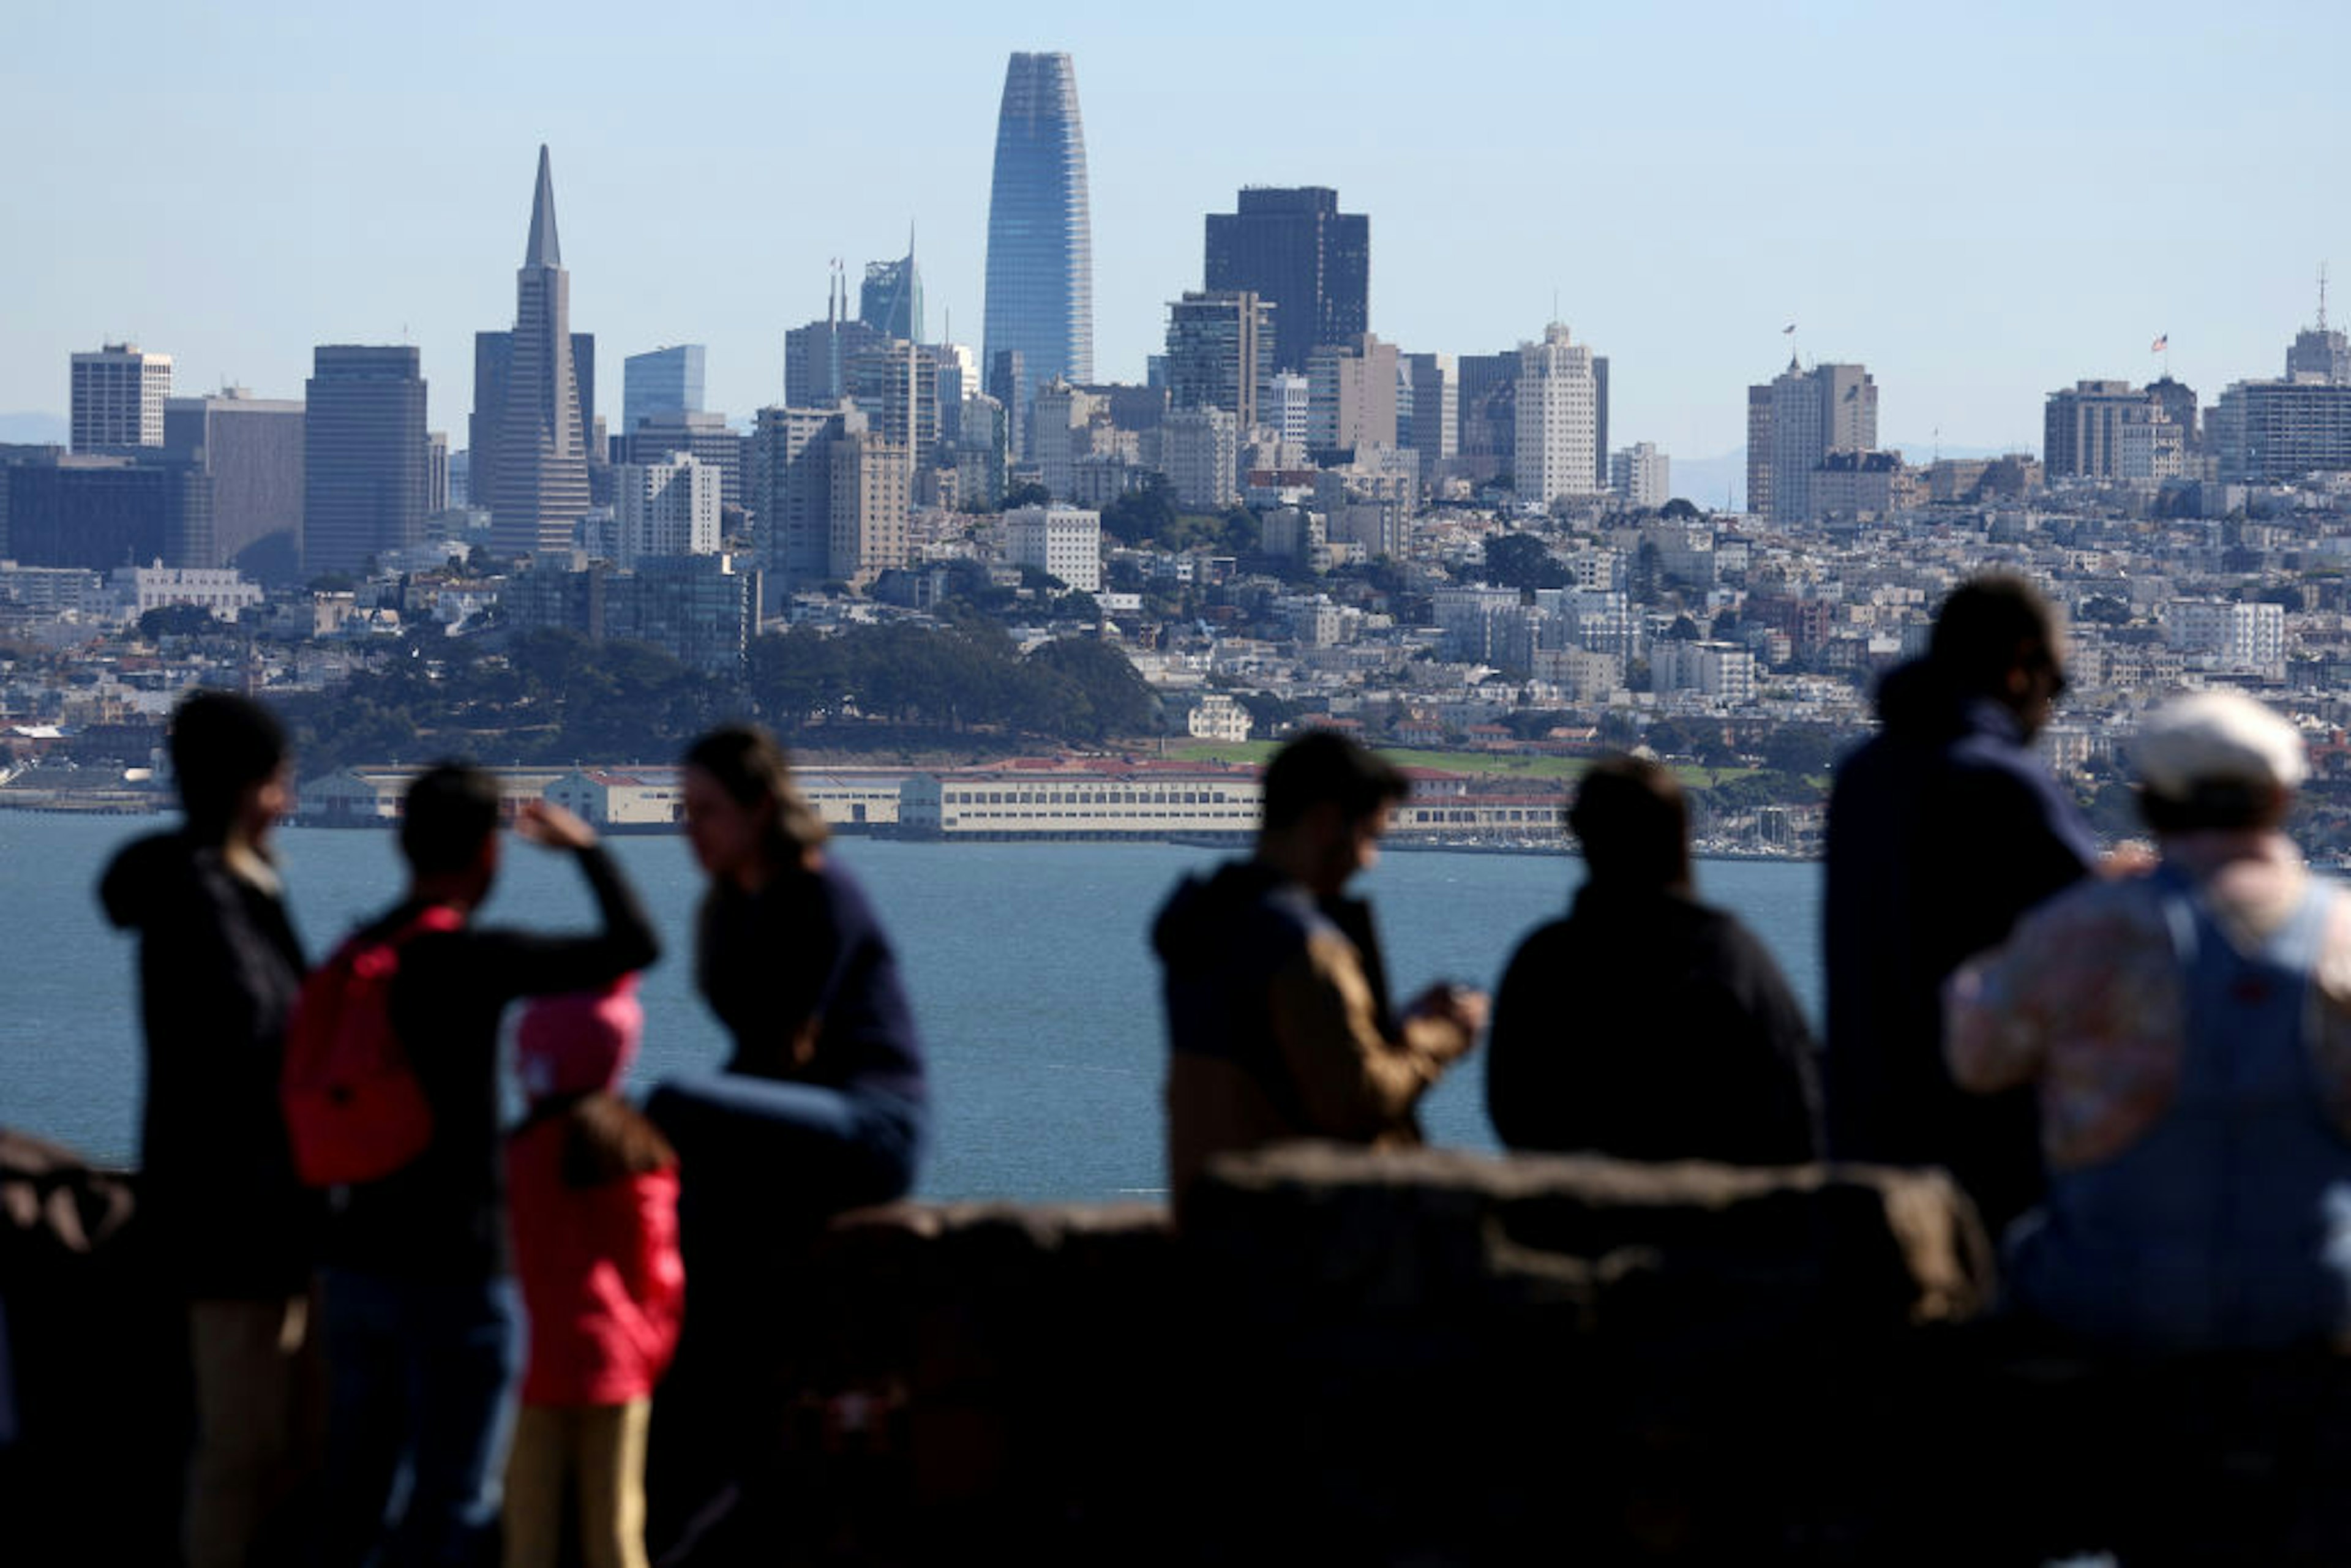 SAUSALITO, CALIFORNIA - OCTOBER 24: Visitors look at the San Francisco skyline from a vista point on October 24, 2022 in Sausalito, California. The State of California, currently the fifth largest economy in the world, is likely to overtake Germany as the fourth largest economy in the near future as the state's gross domestic product is continuing to rise with steady growth. (Photo by Justin Sullivan/Getty Images)